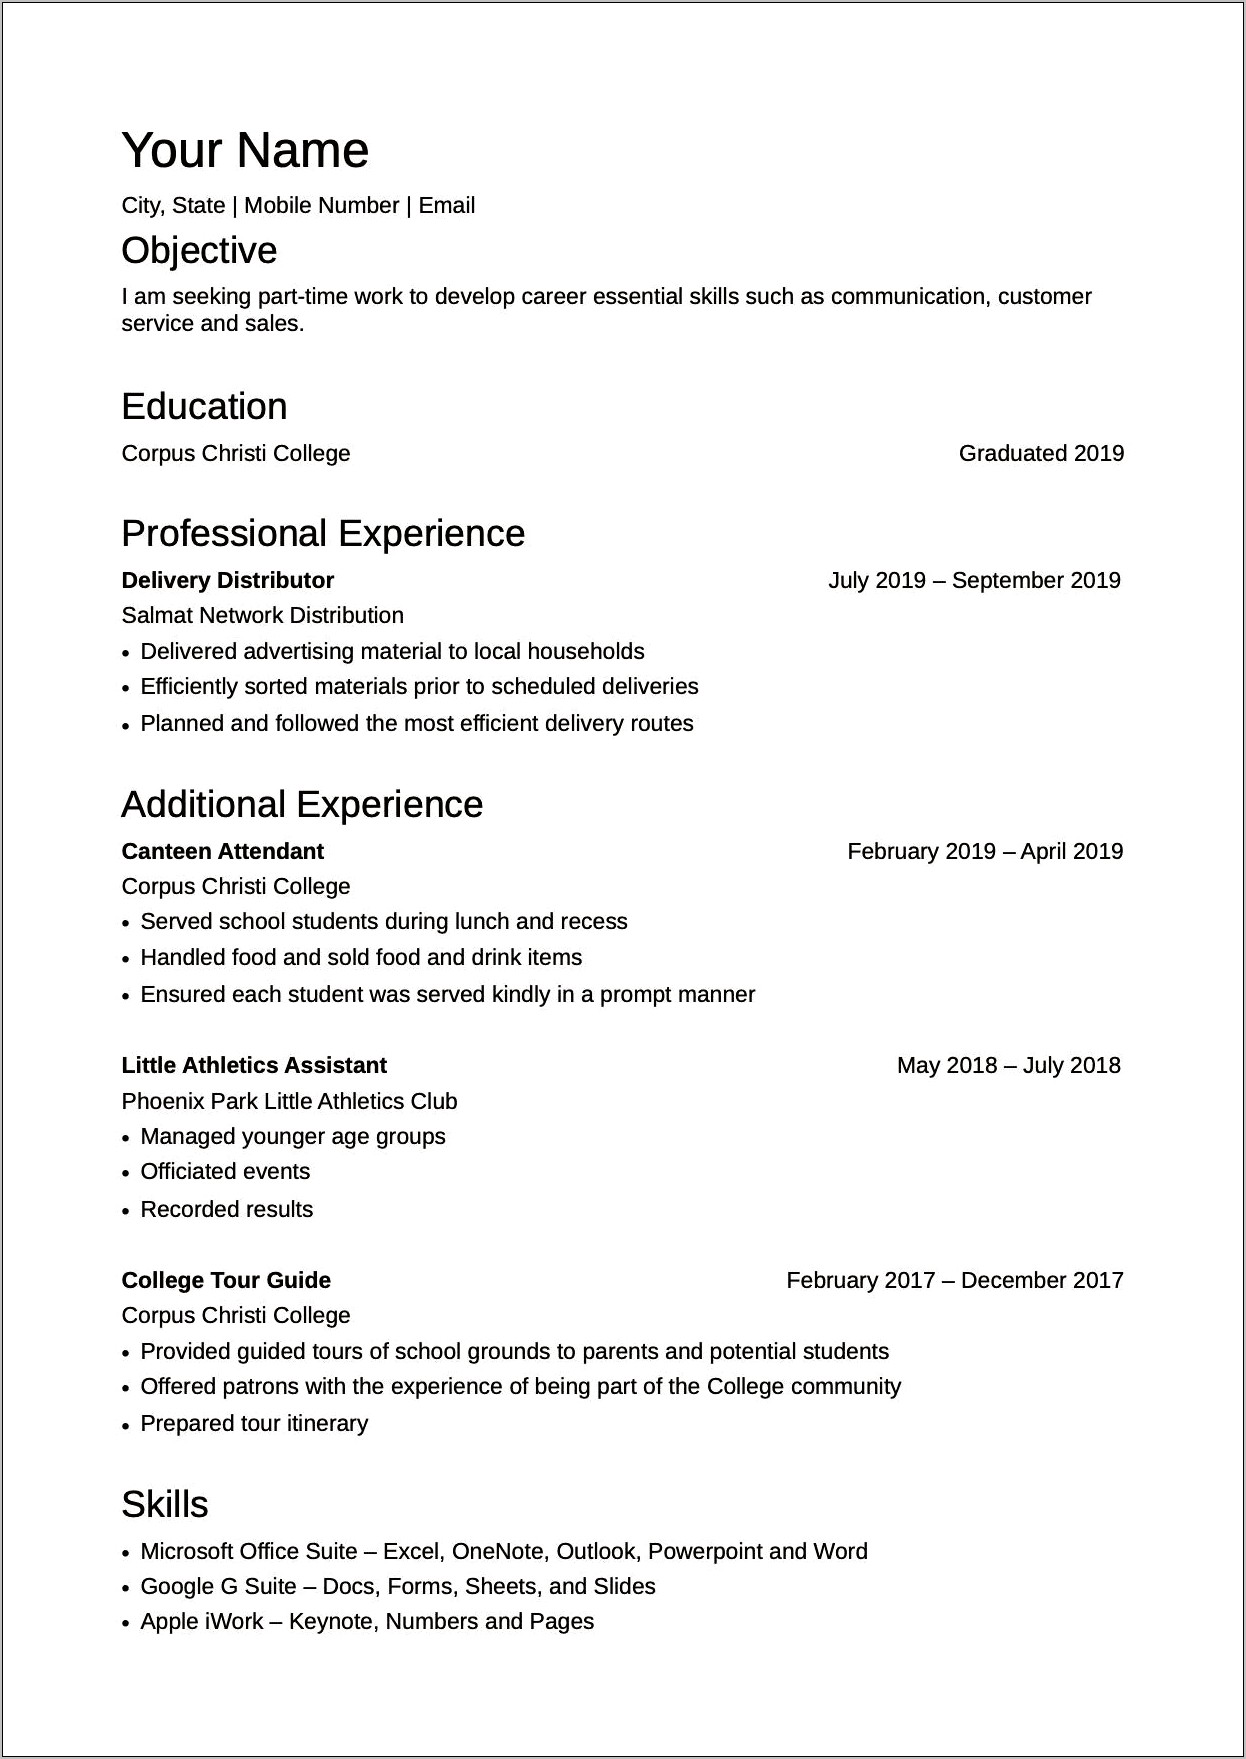 Resume For High School Graduate With Little Experience